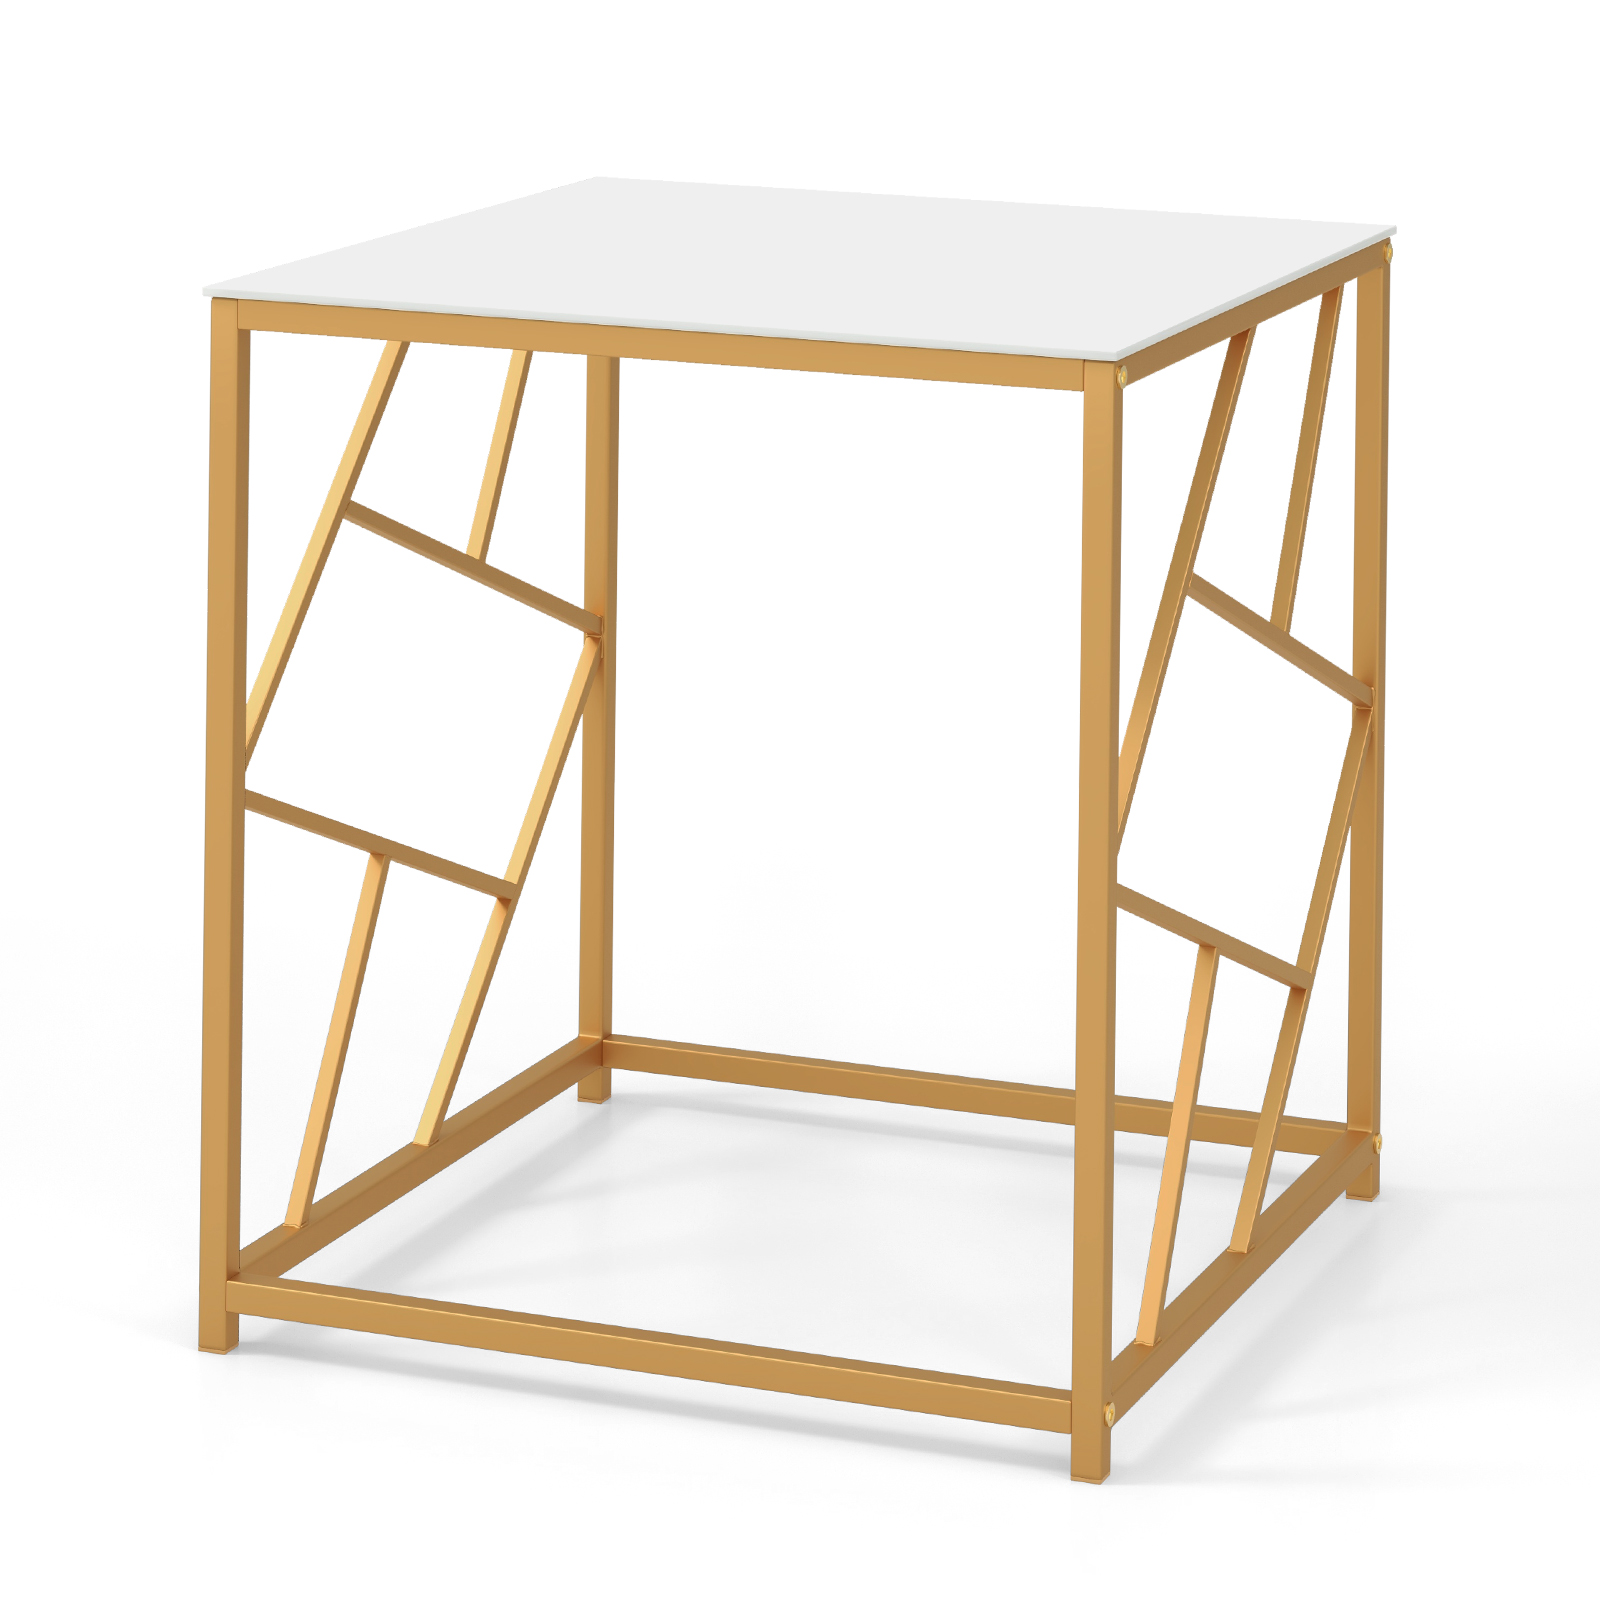 Square_End_Table_with_Tempered_Glass_Tabletop_and_Gold_Finish_Geometric_Frame_White-7.jpg